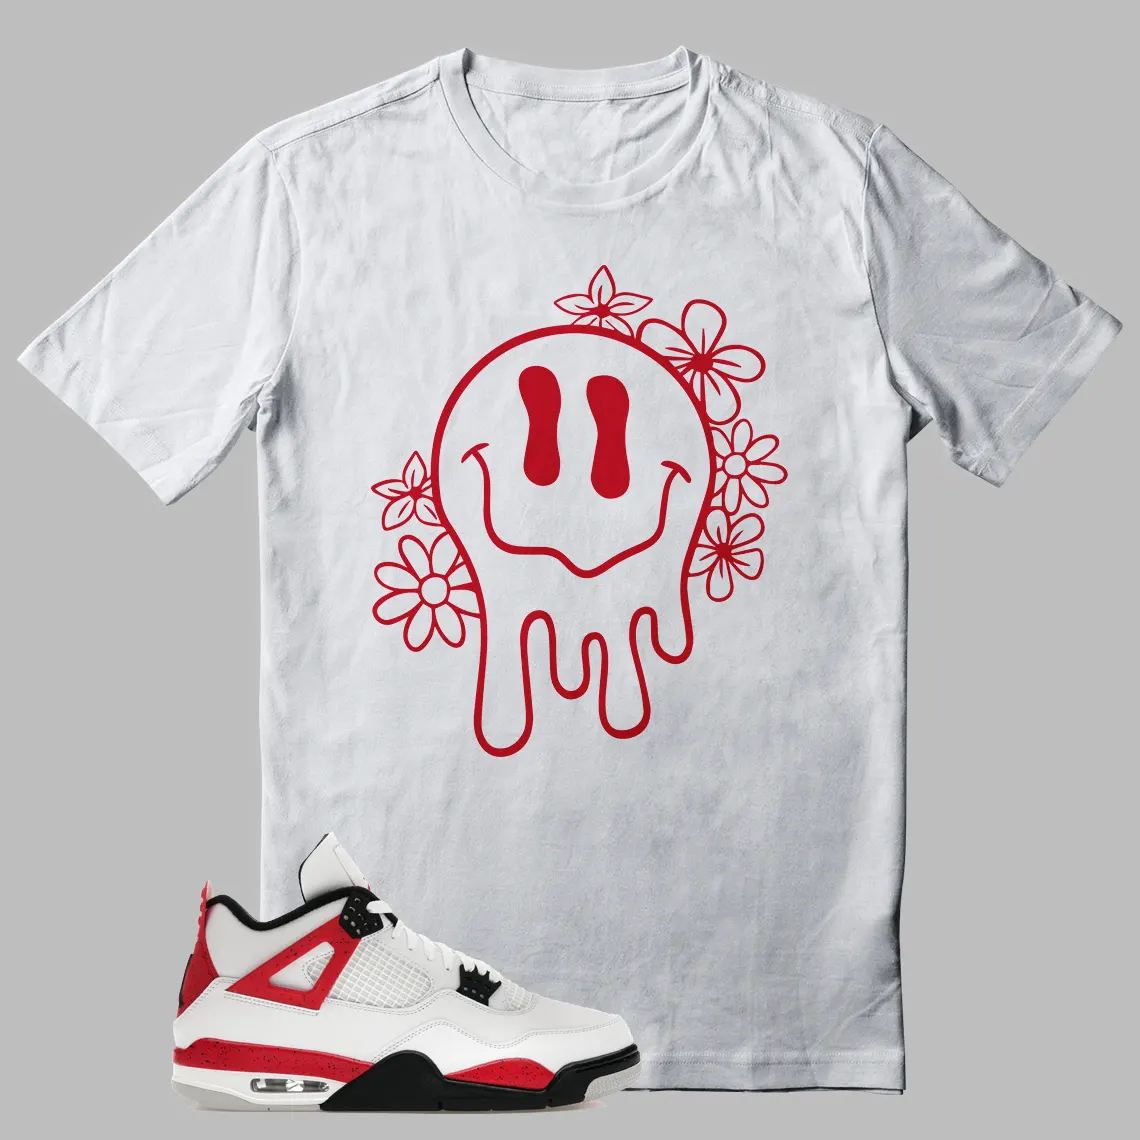 Jordan 4 Red Cement Floral Dripping Smiley Face Graphic